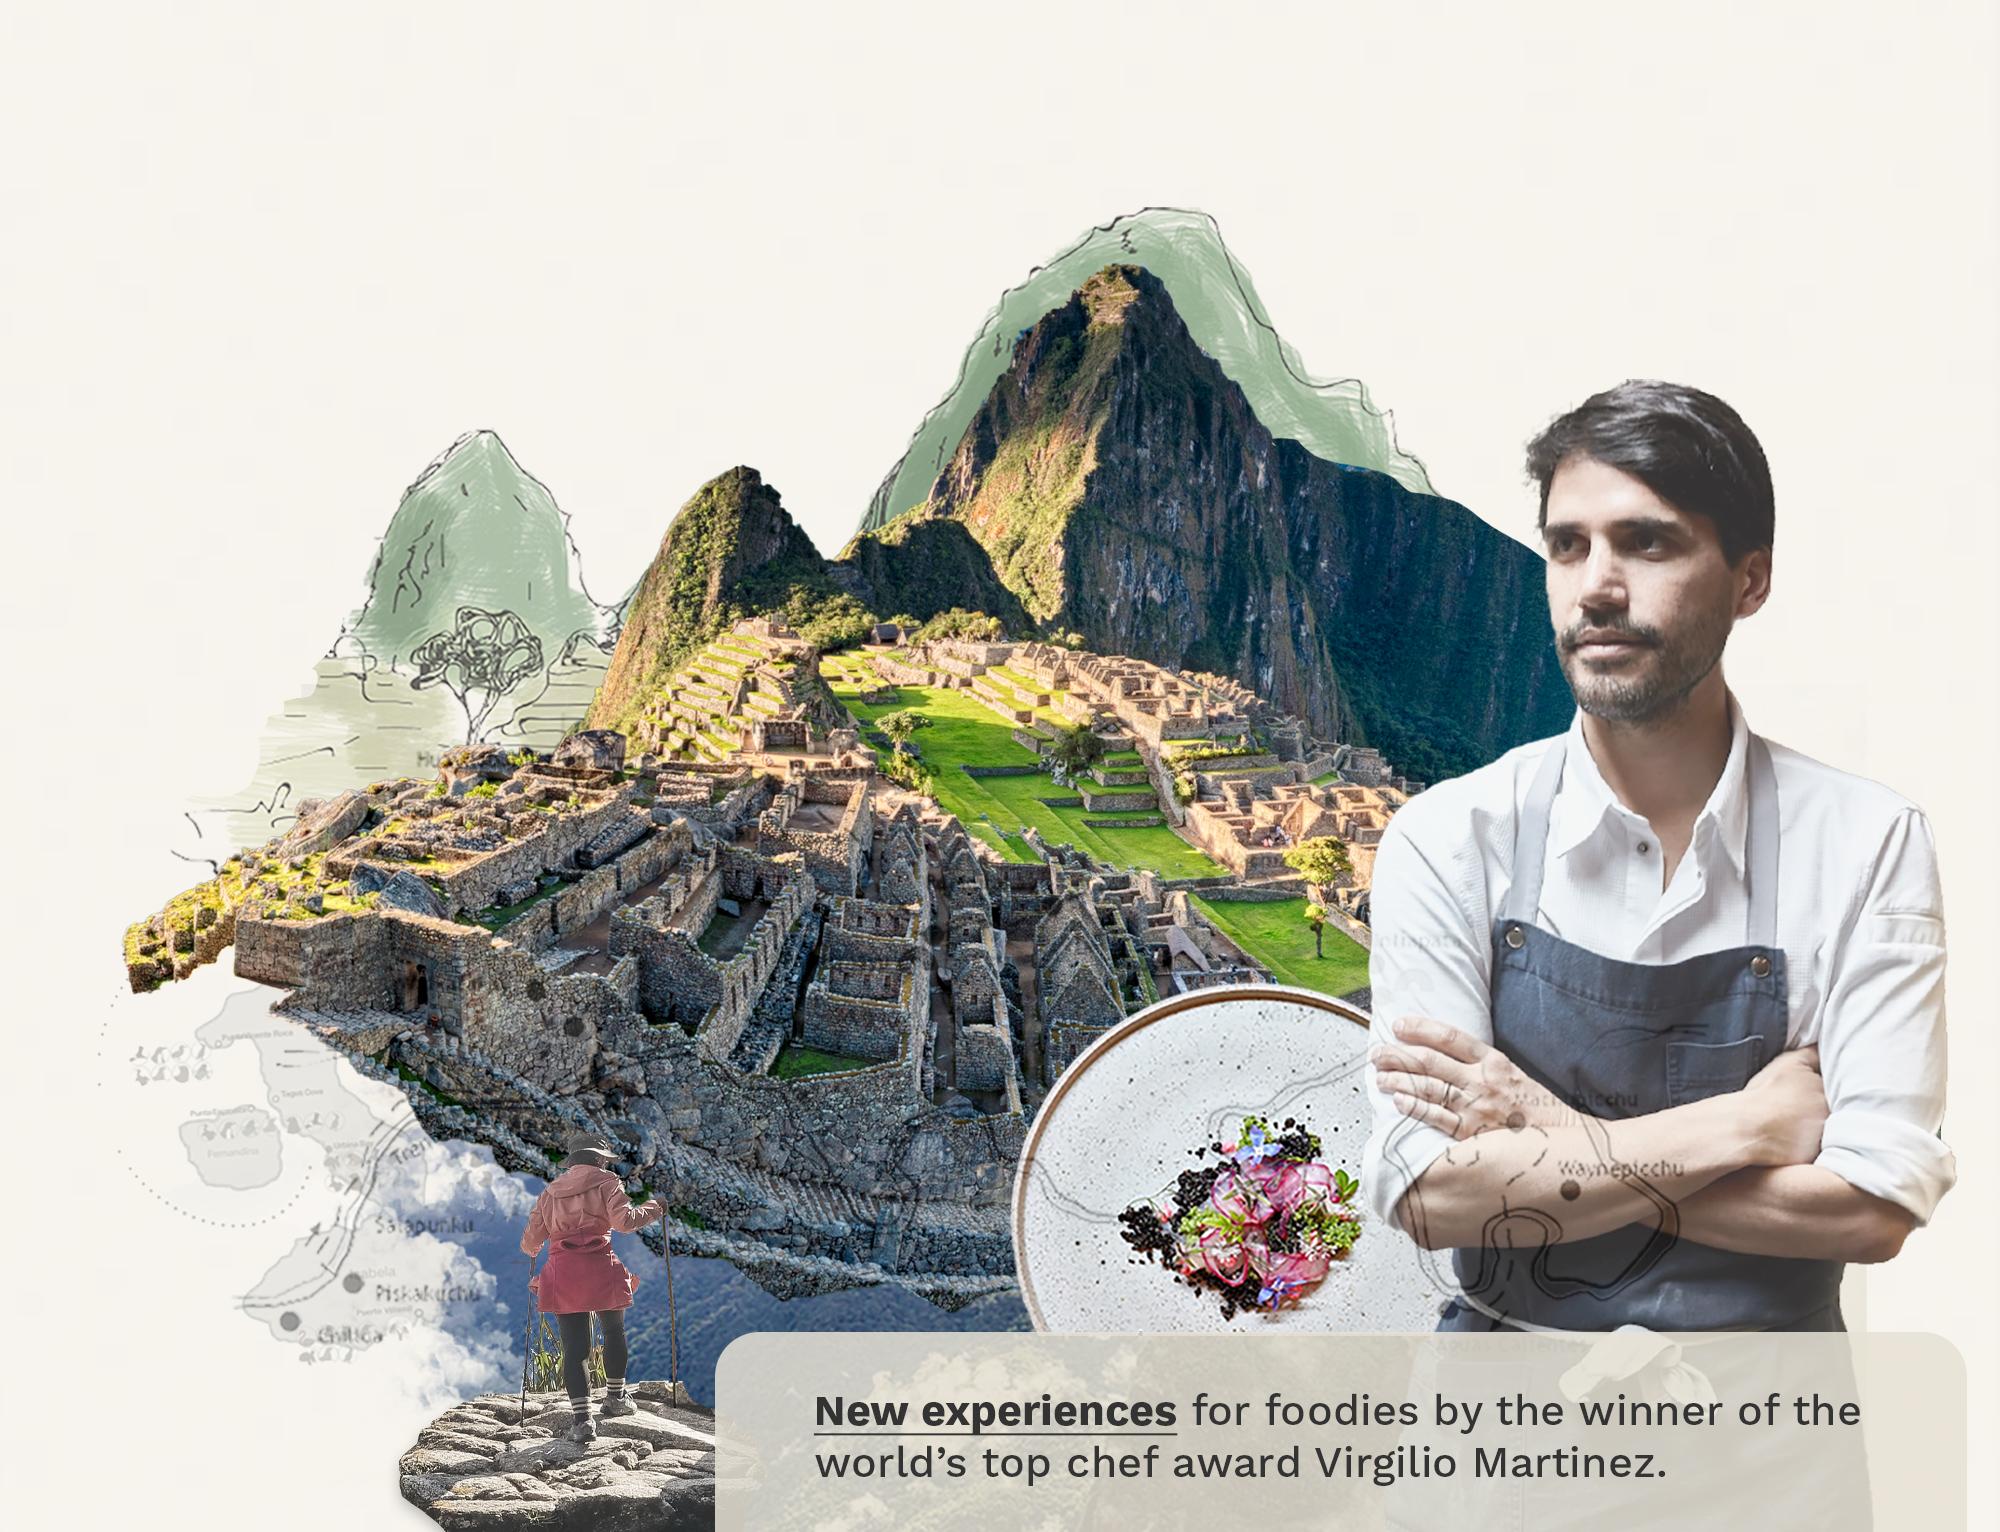 Collage showing Machu Picchu and Virgilio Martinez, one of the world's top chefs.